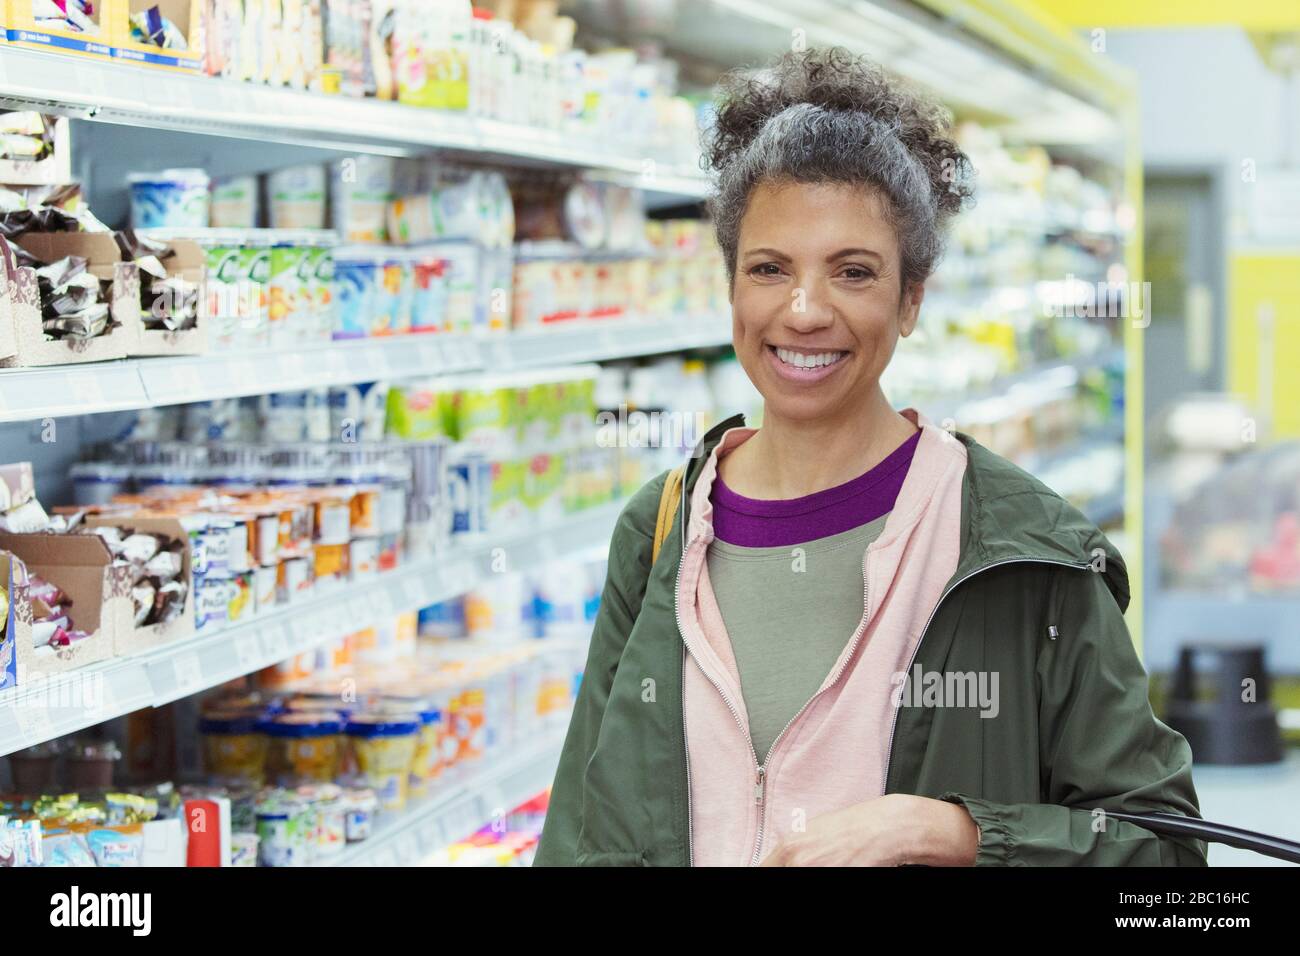 Portrait smiling, confident woman shopping in supermarket Stock Photo